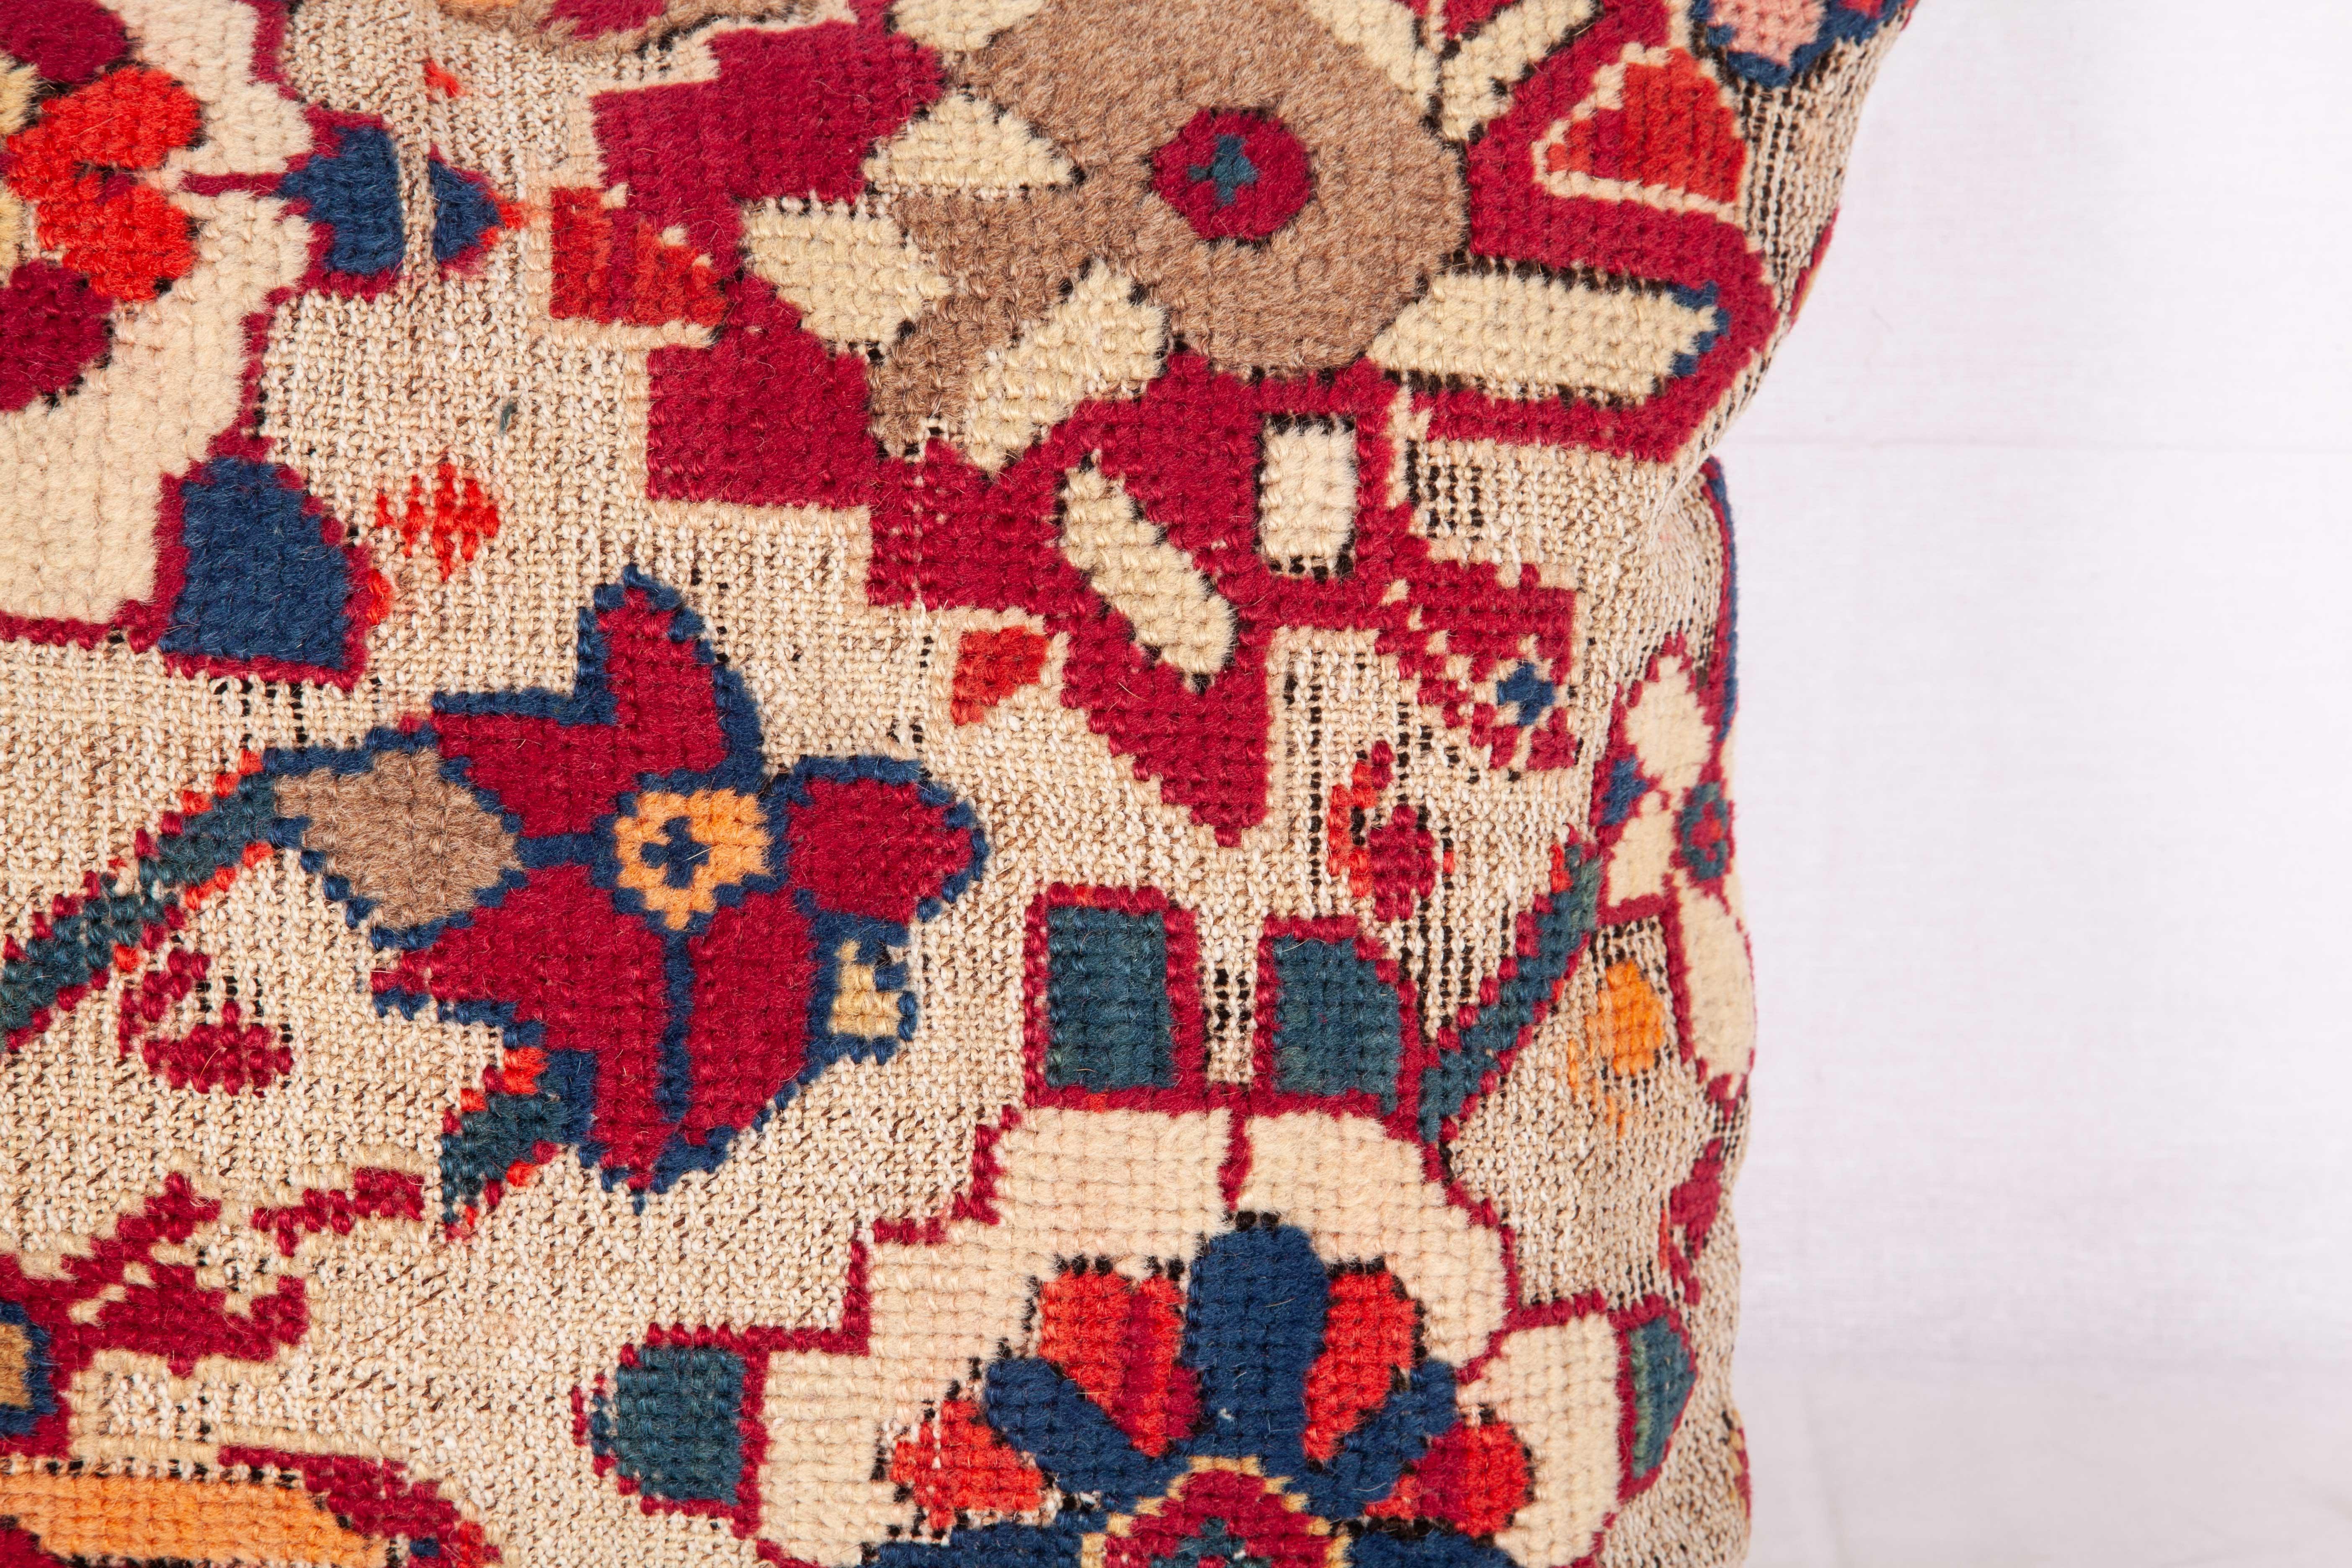 Antique Cushion / Pillow Case Fashioned from an Armenian Shusha Rug (Stammeskunst)